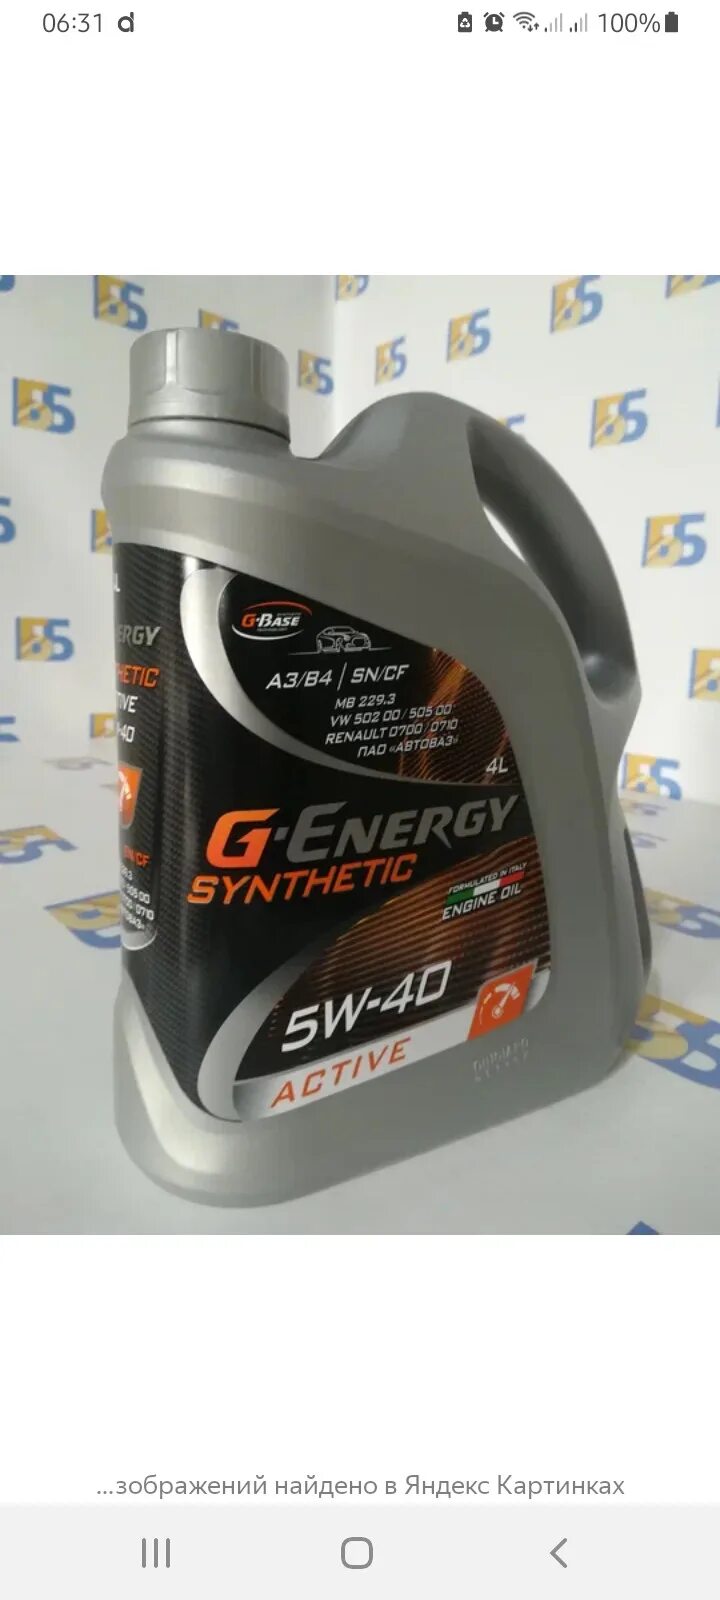 G Energy Synthetic 5w40. G-Energy Synthetic Active 5w-40. G-Energy Synthetic Active 5w40 4л. G Energy 5w40 синтетика Active. Масло моторное 5w40 synthetic g energy